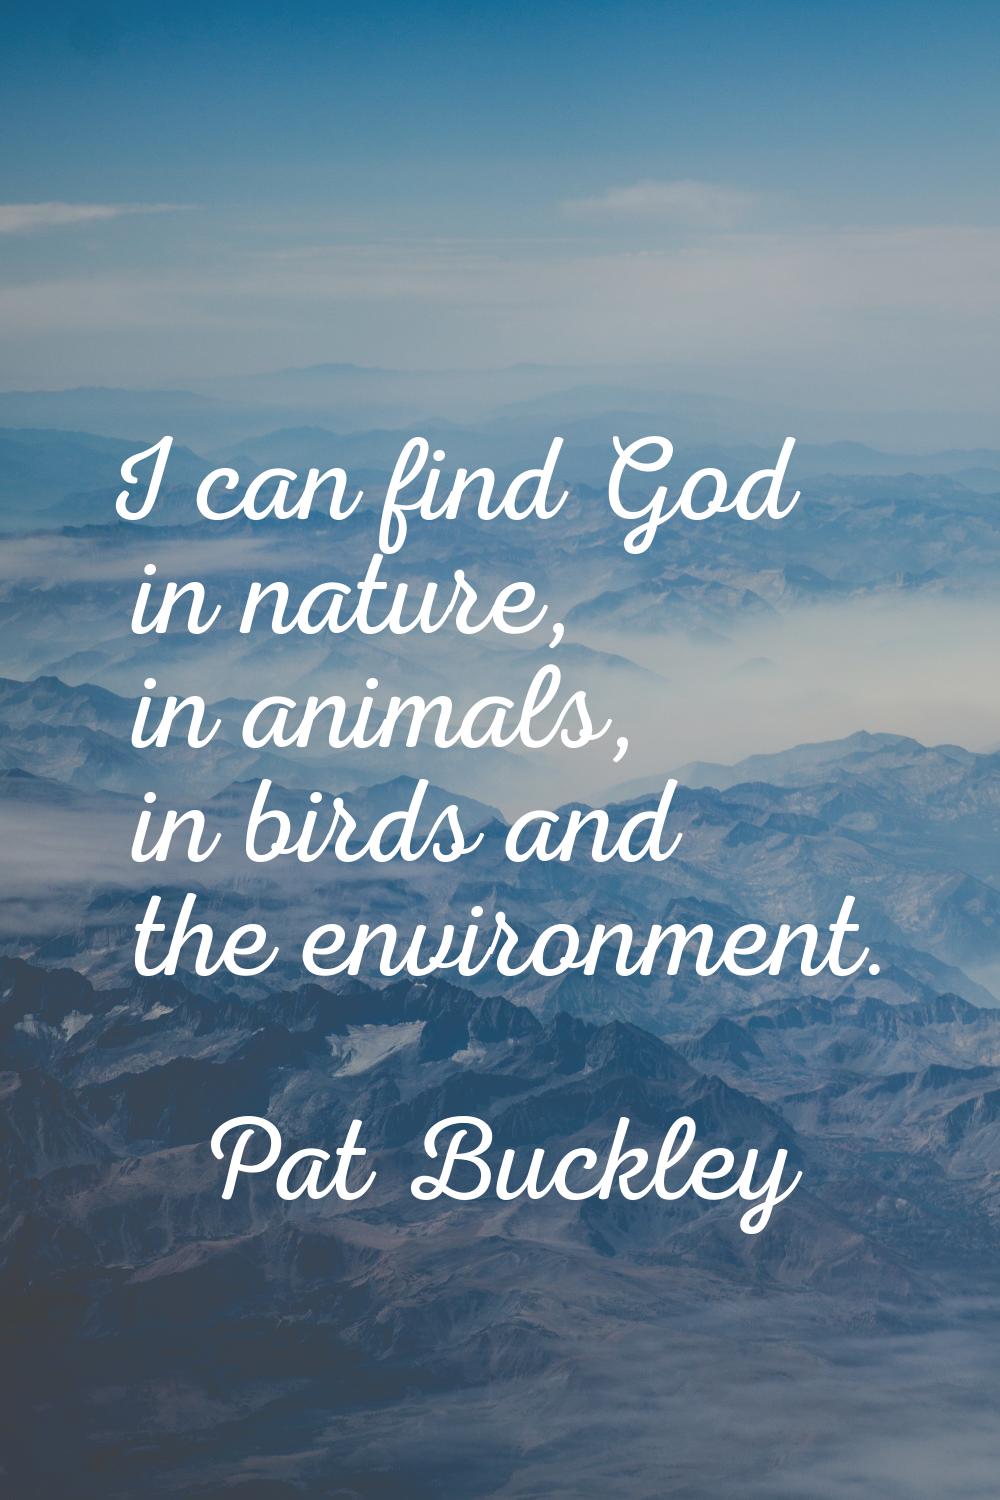 I can find God in nature, in animals, in birds and the environment.